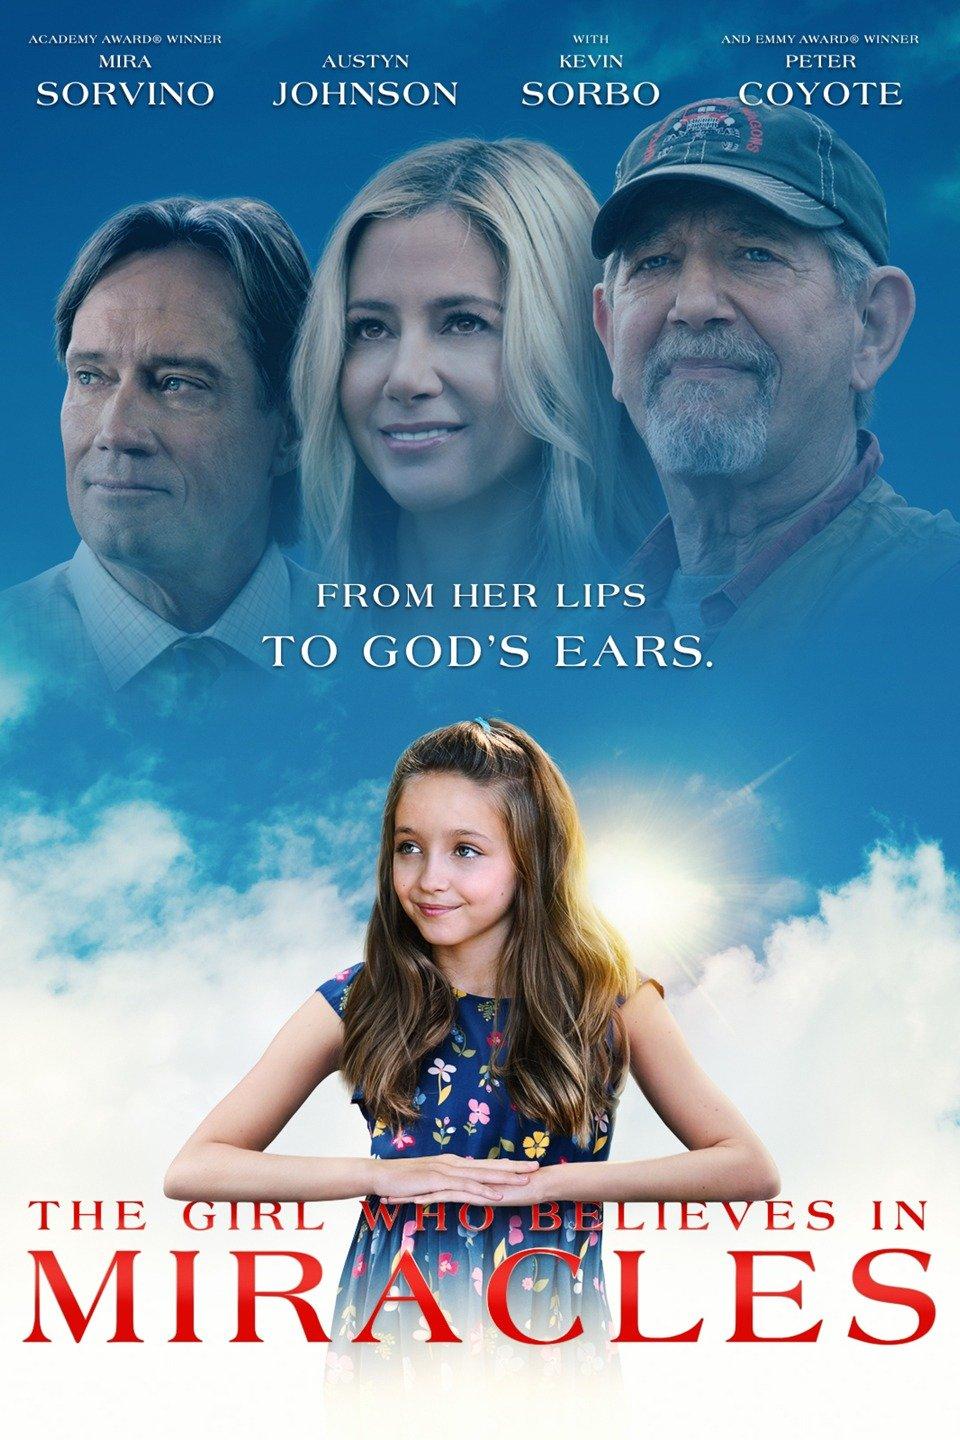 Movie poster for the faith-based film "The Girl Who Believes in Miracles." (Gerson Productions)